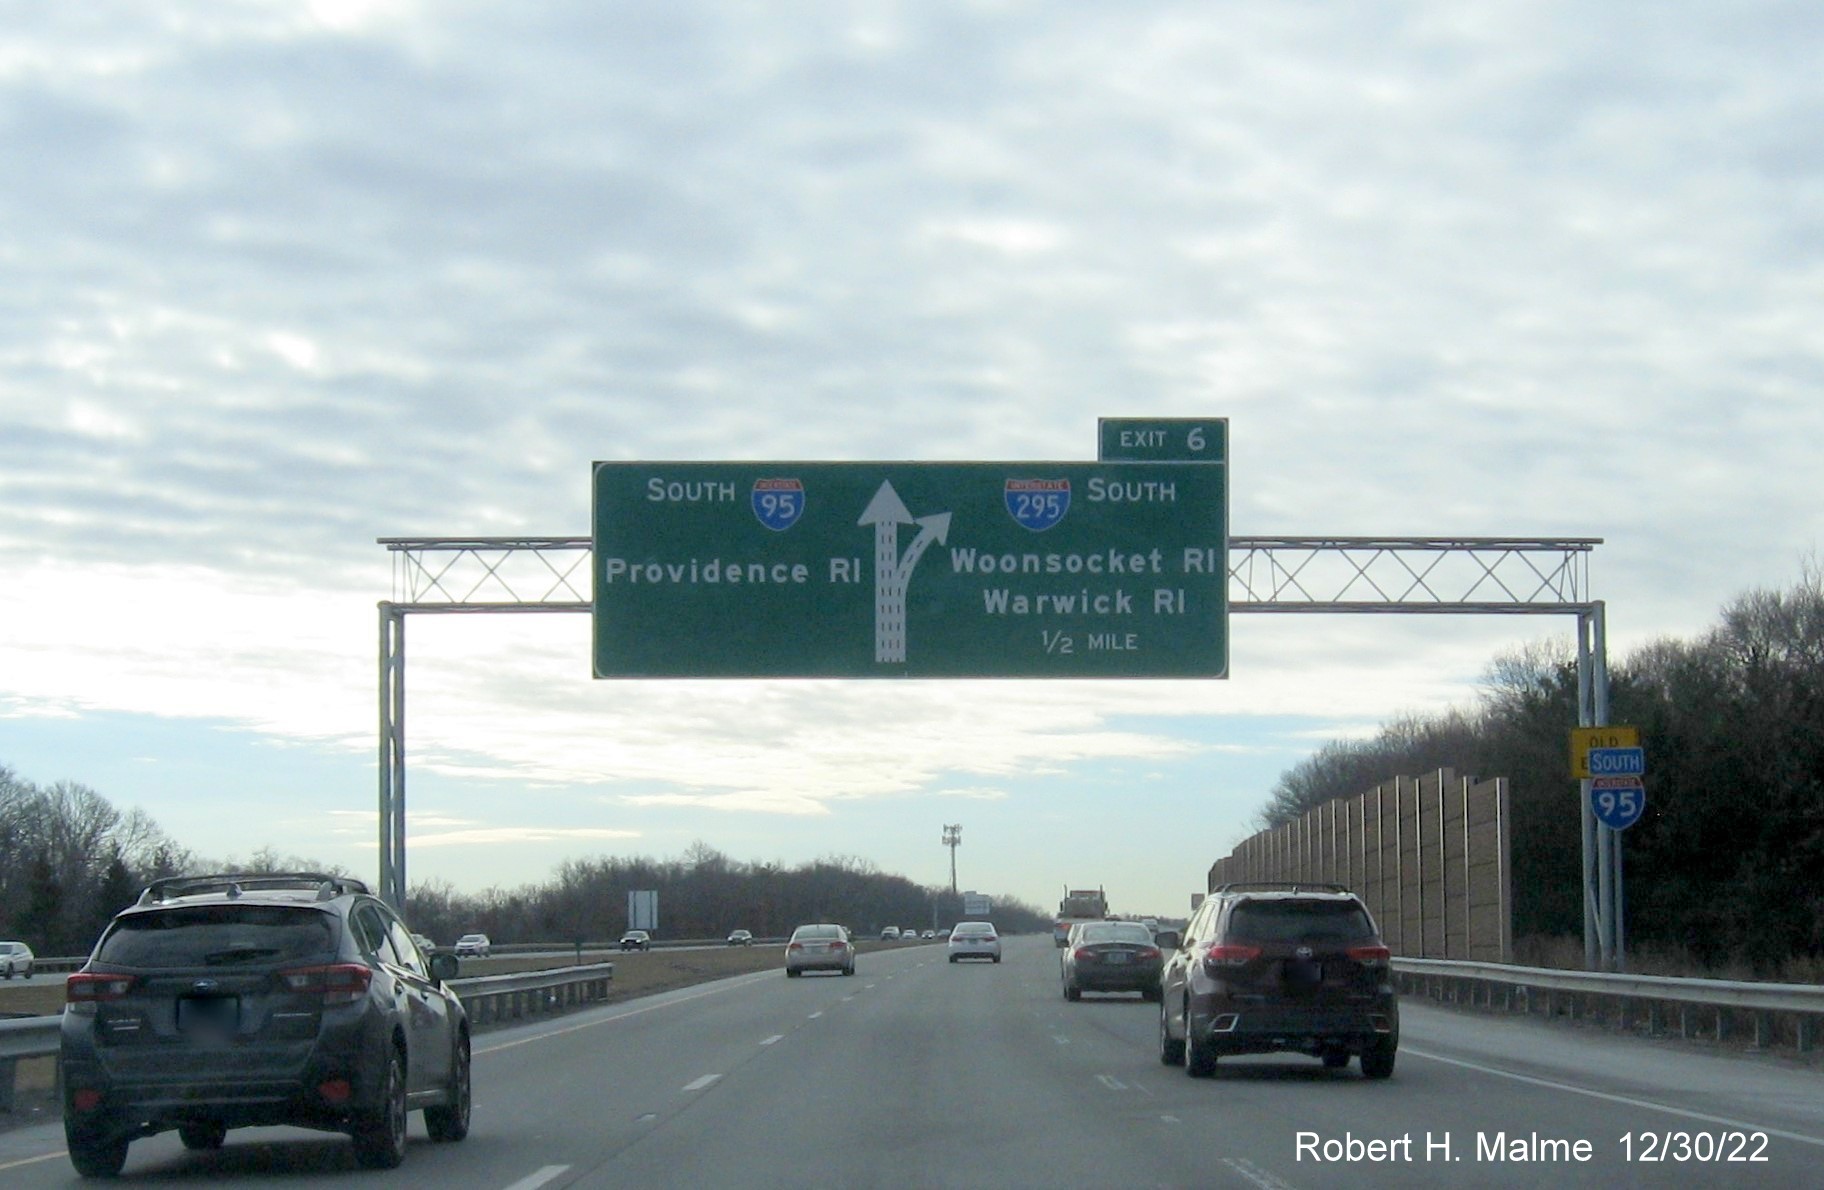 Image of newly placed South I-95 reassurance marker in front of 1/2 Mile advance overhead sign for I-295 South exit in Attleboro, December 2022